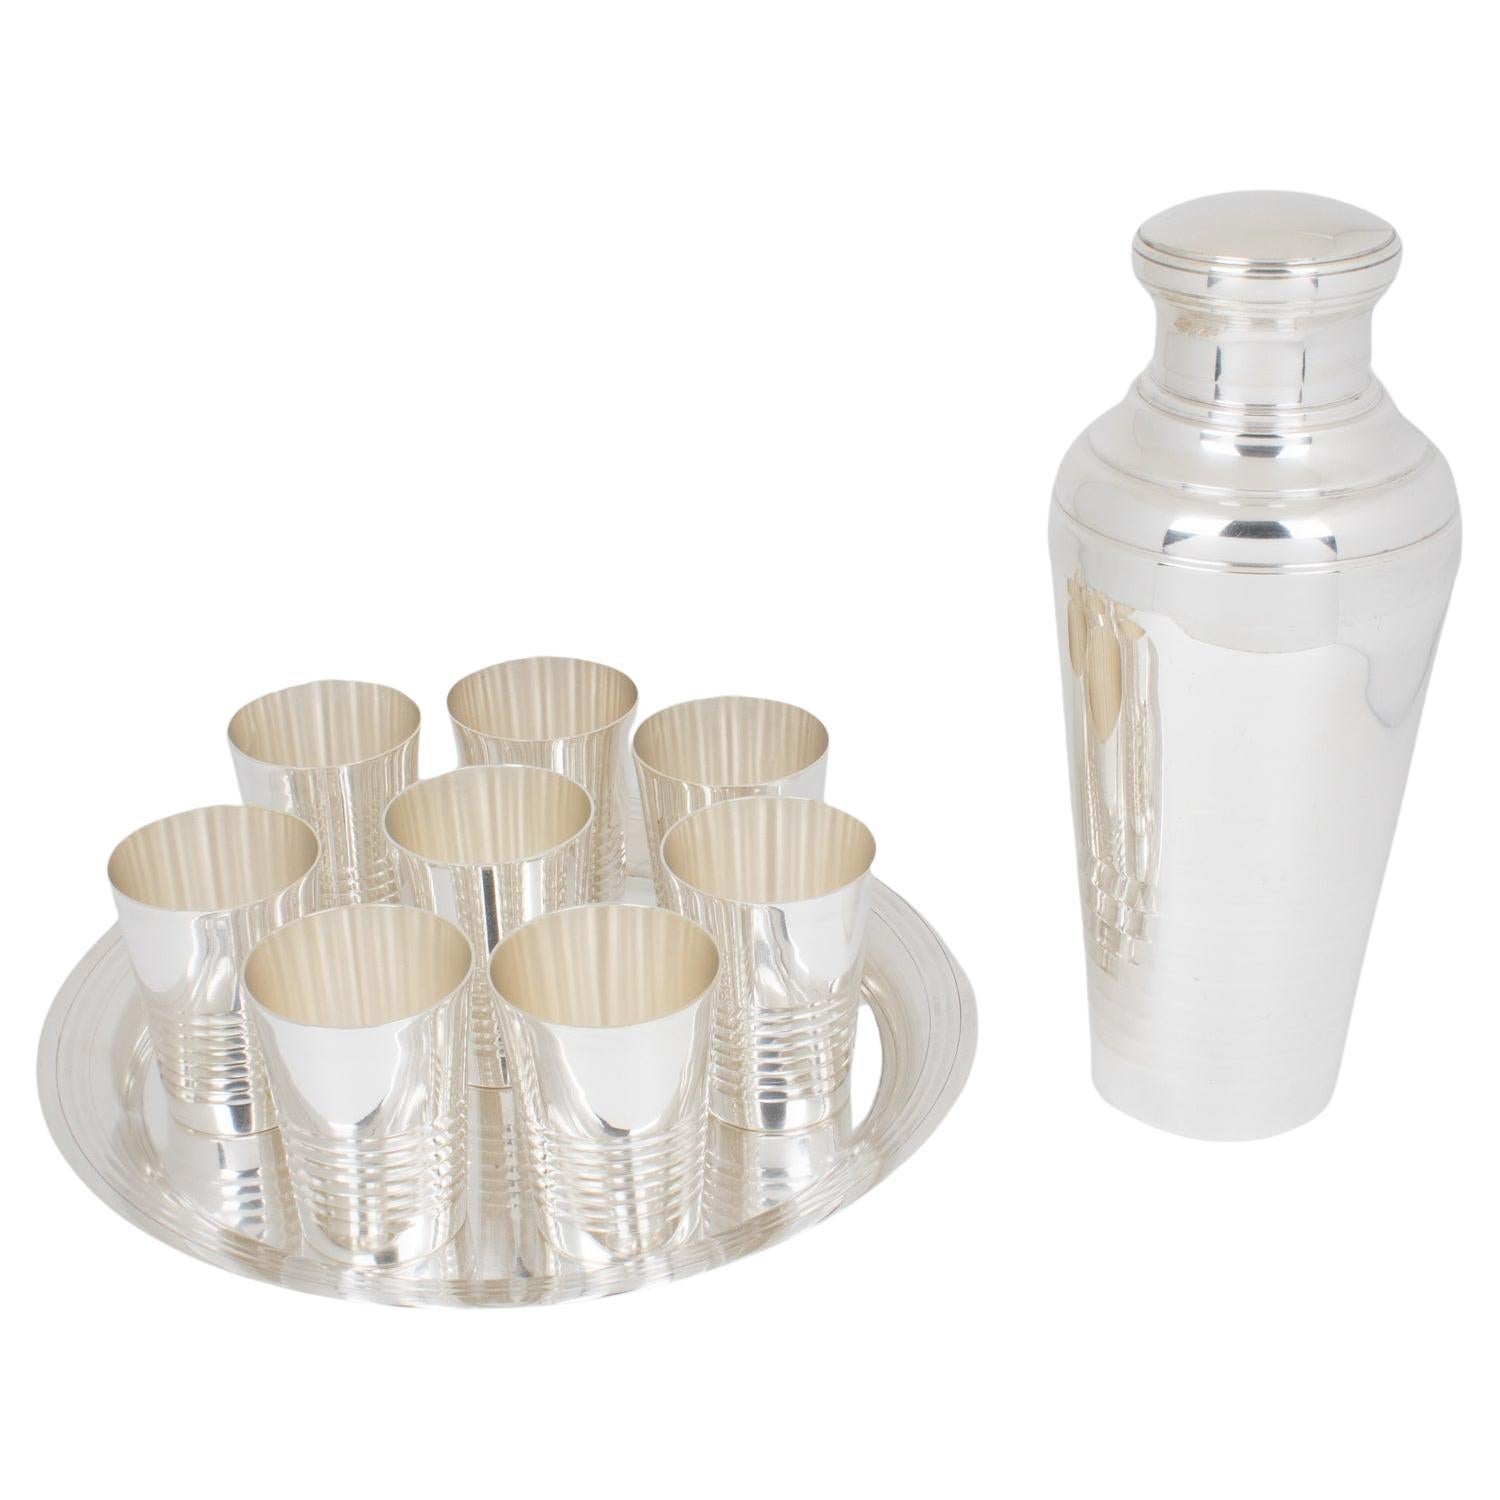 Art Deco Barware Silver Plate Cocktail Shaker, Eight Glasses and Tray Set, 1940s For Sale